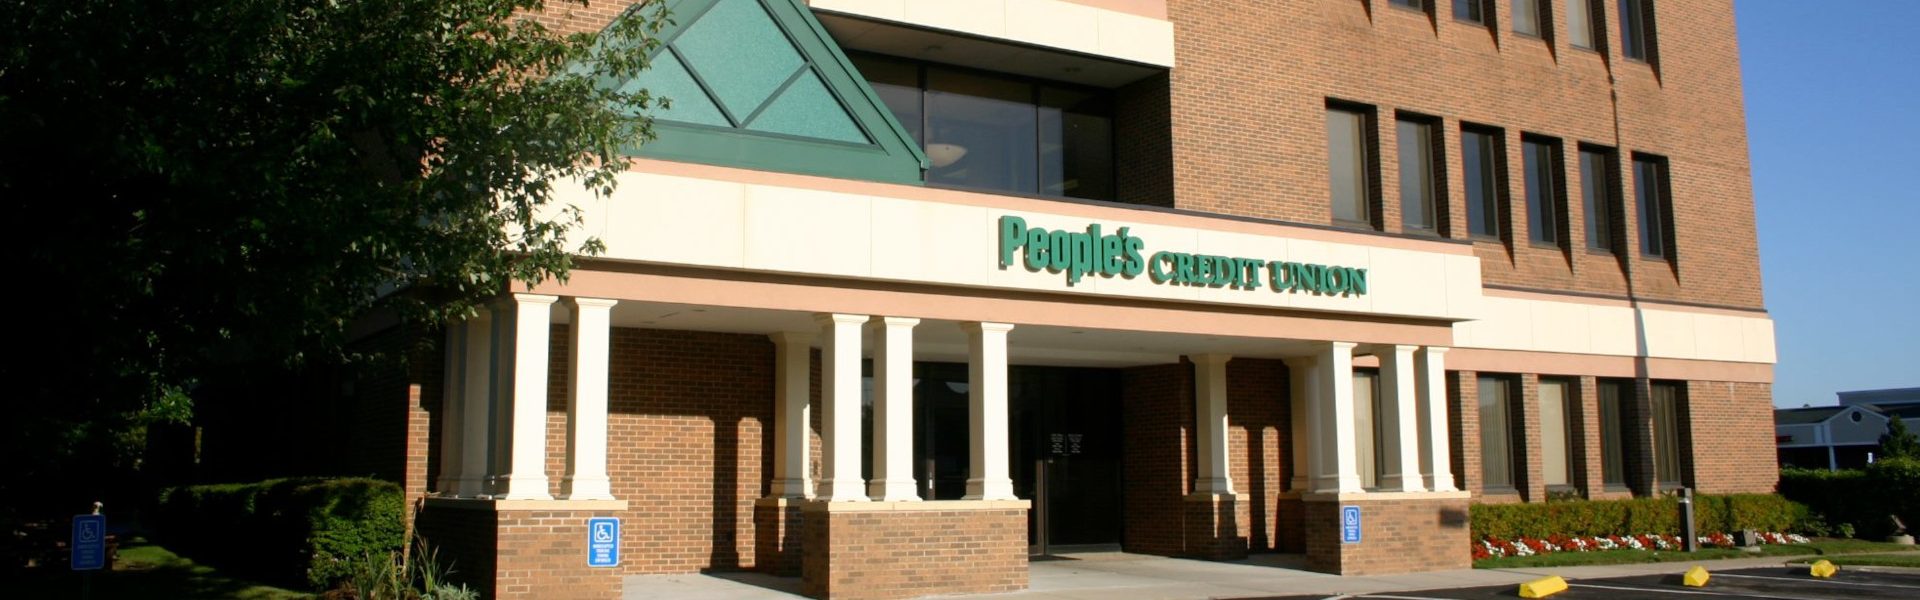 People's Credit Union building exterior